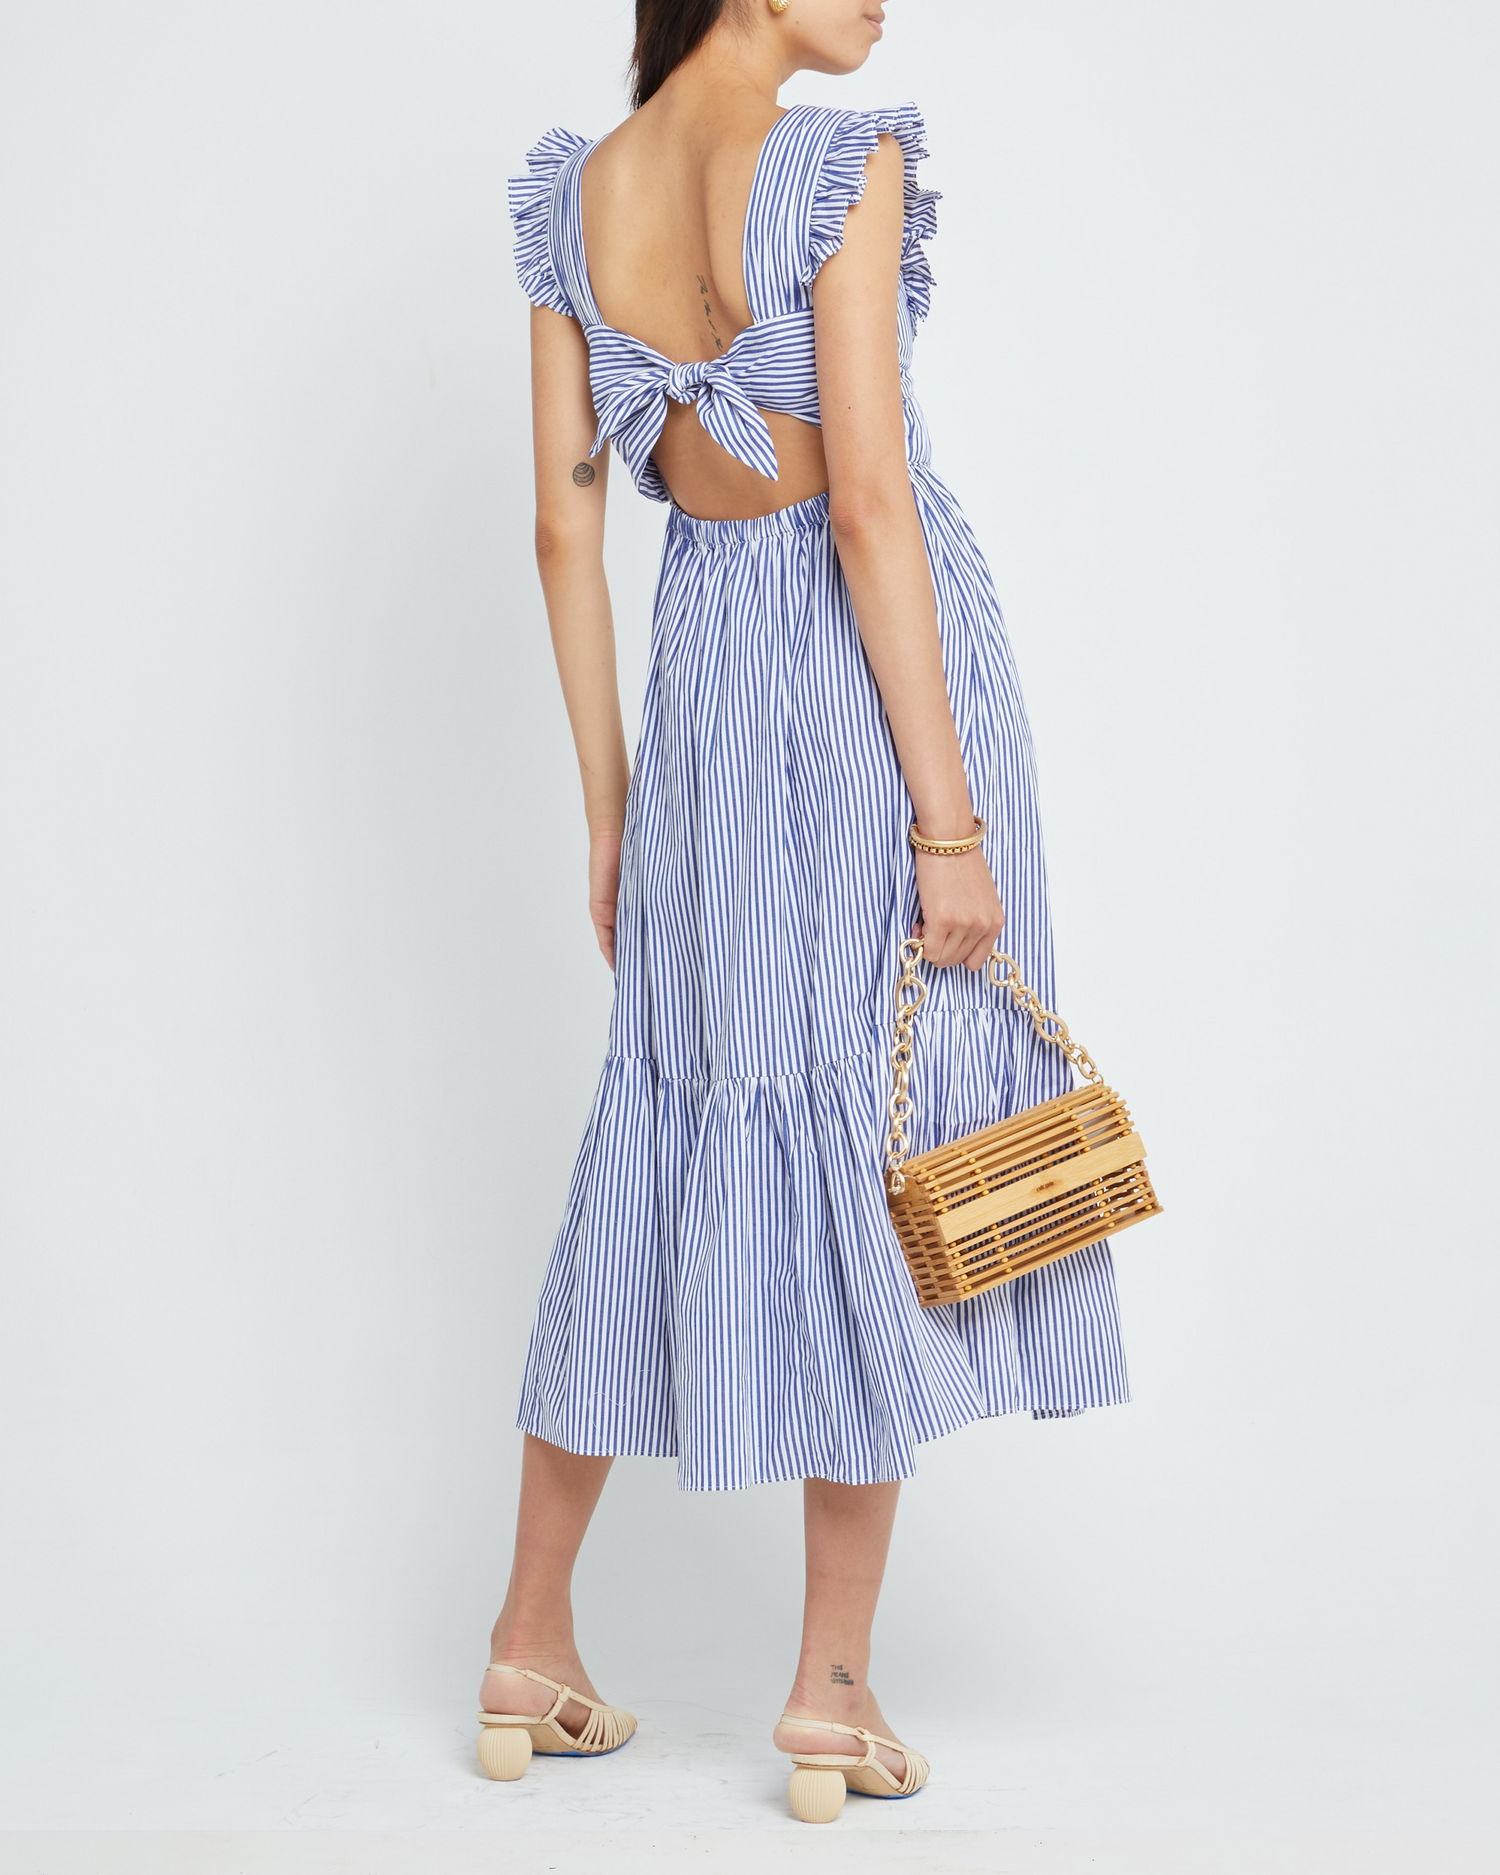 Second image of Stella Dress, a blue midi dress, ruffle sleeves, V-neck, lace, tiered